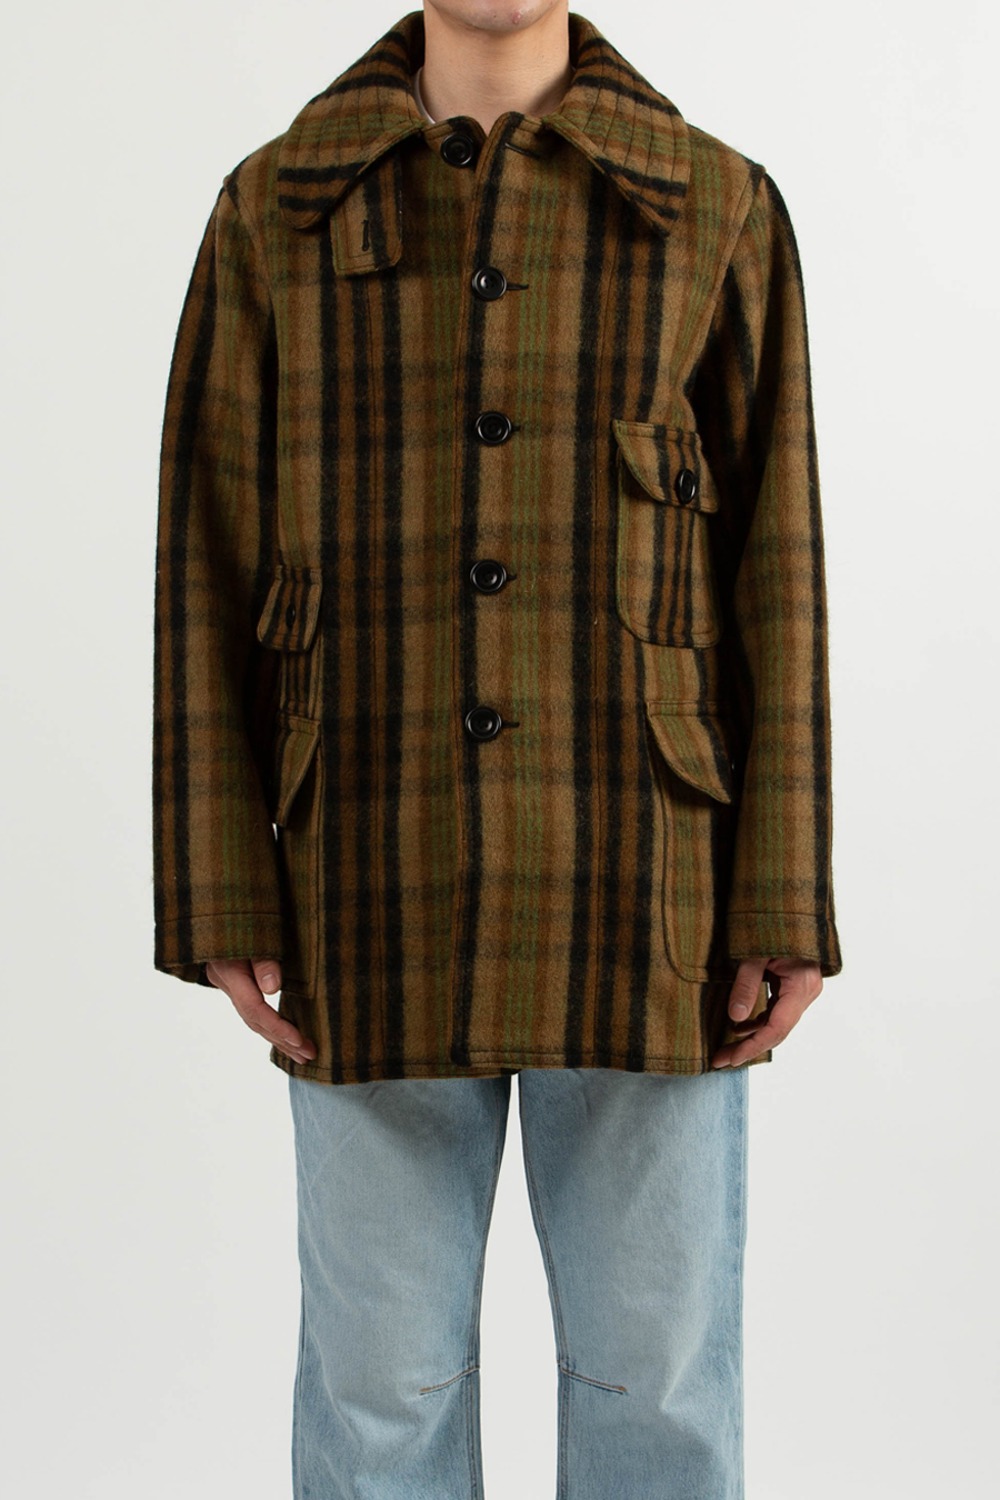 1920s TO 1932 WINTER HUNTING COAT BEIGE CHECK